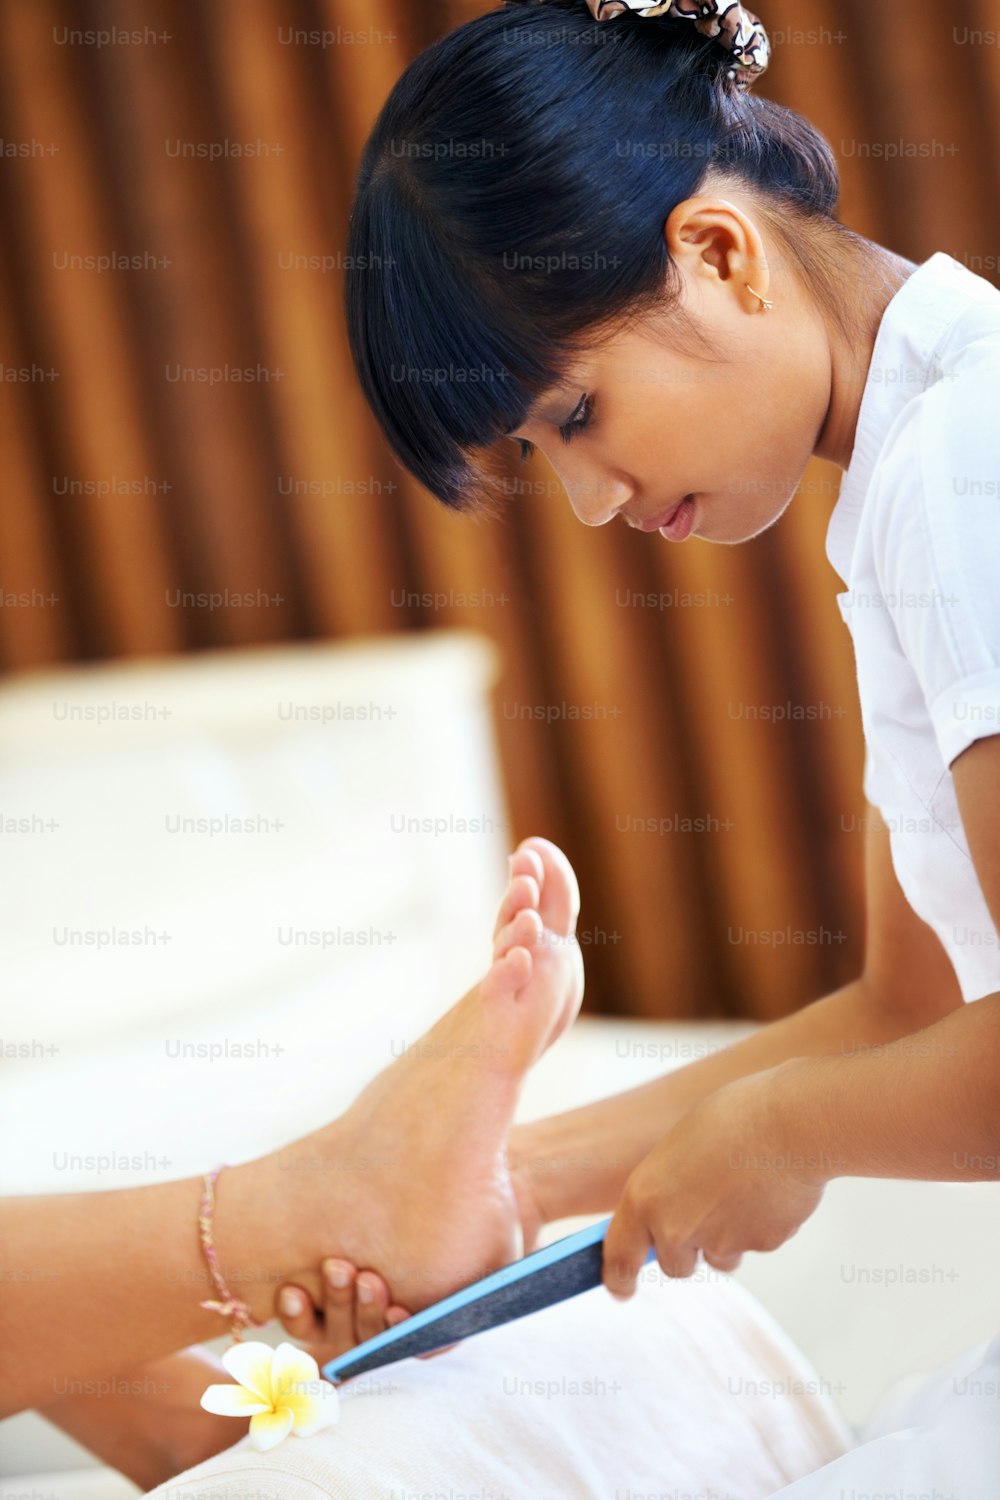 Pretty young girl gives a relaxing pedicure at a spa